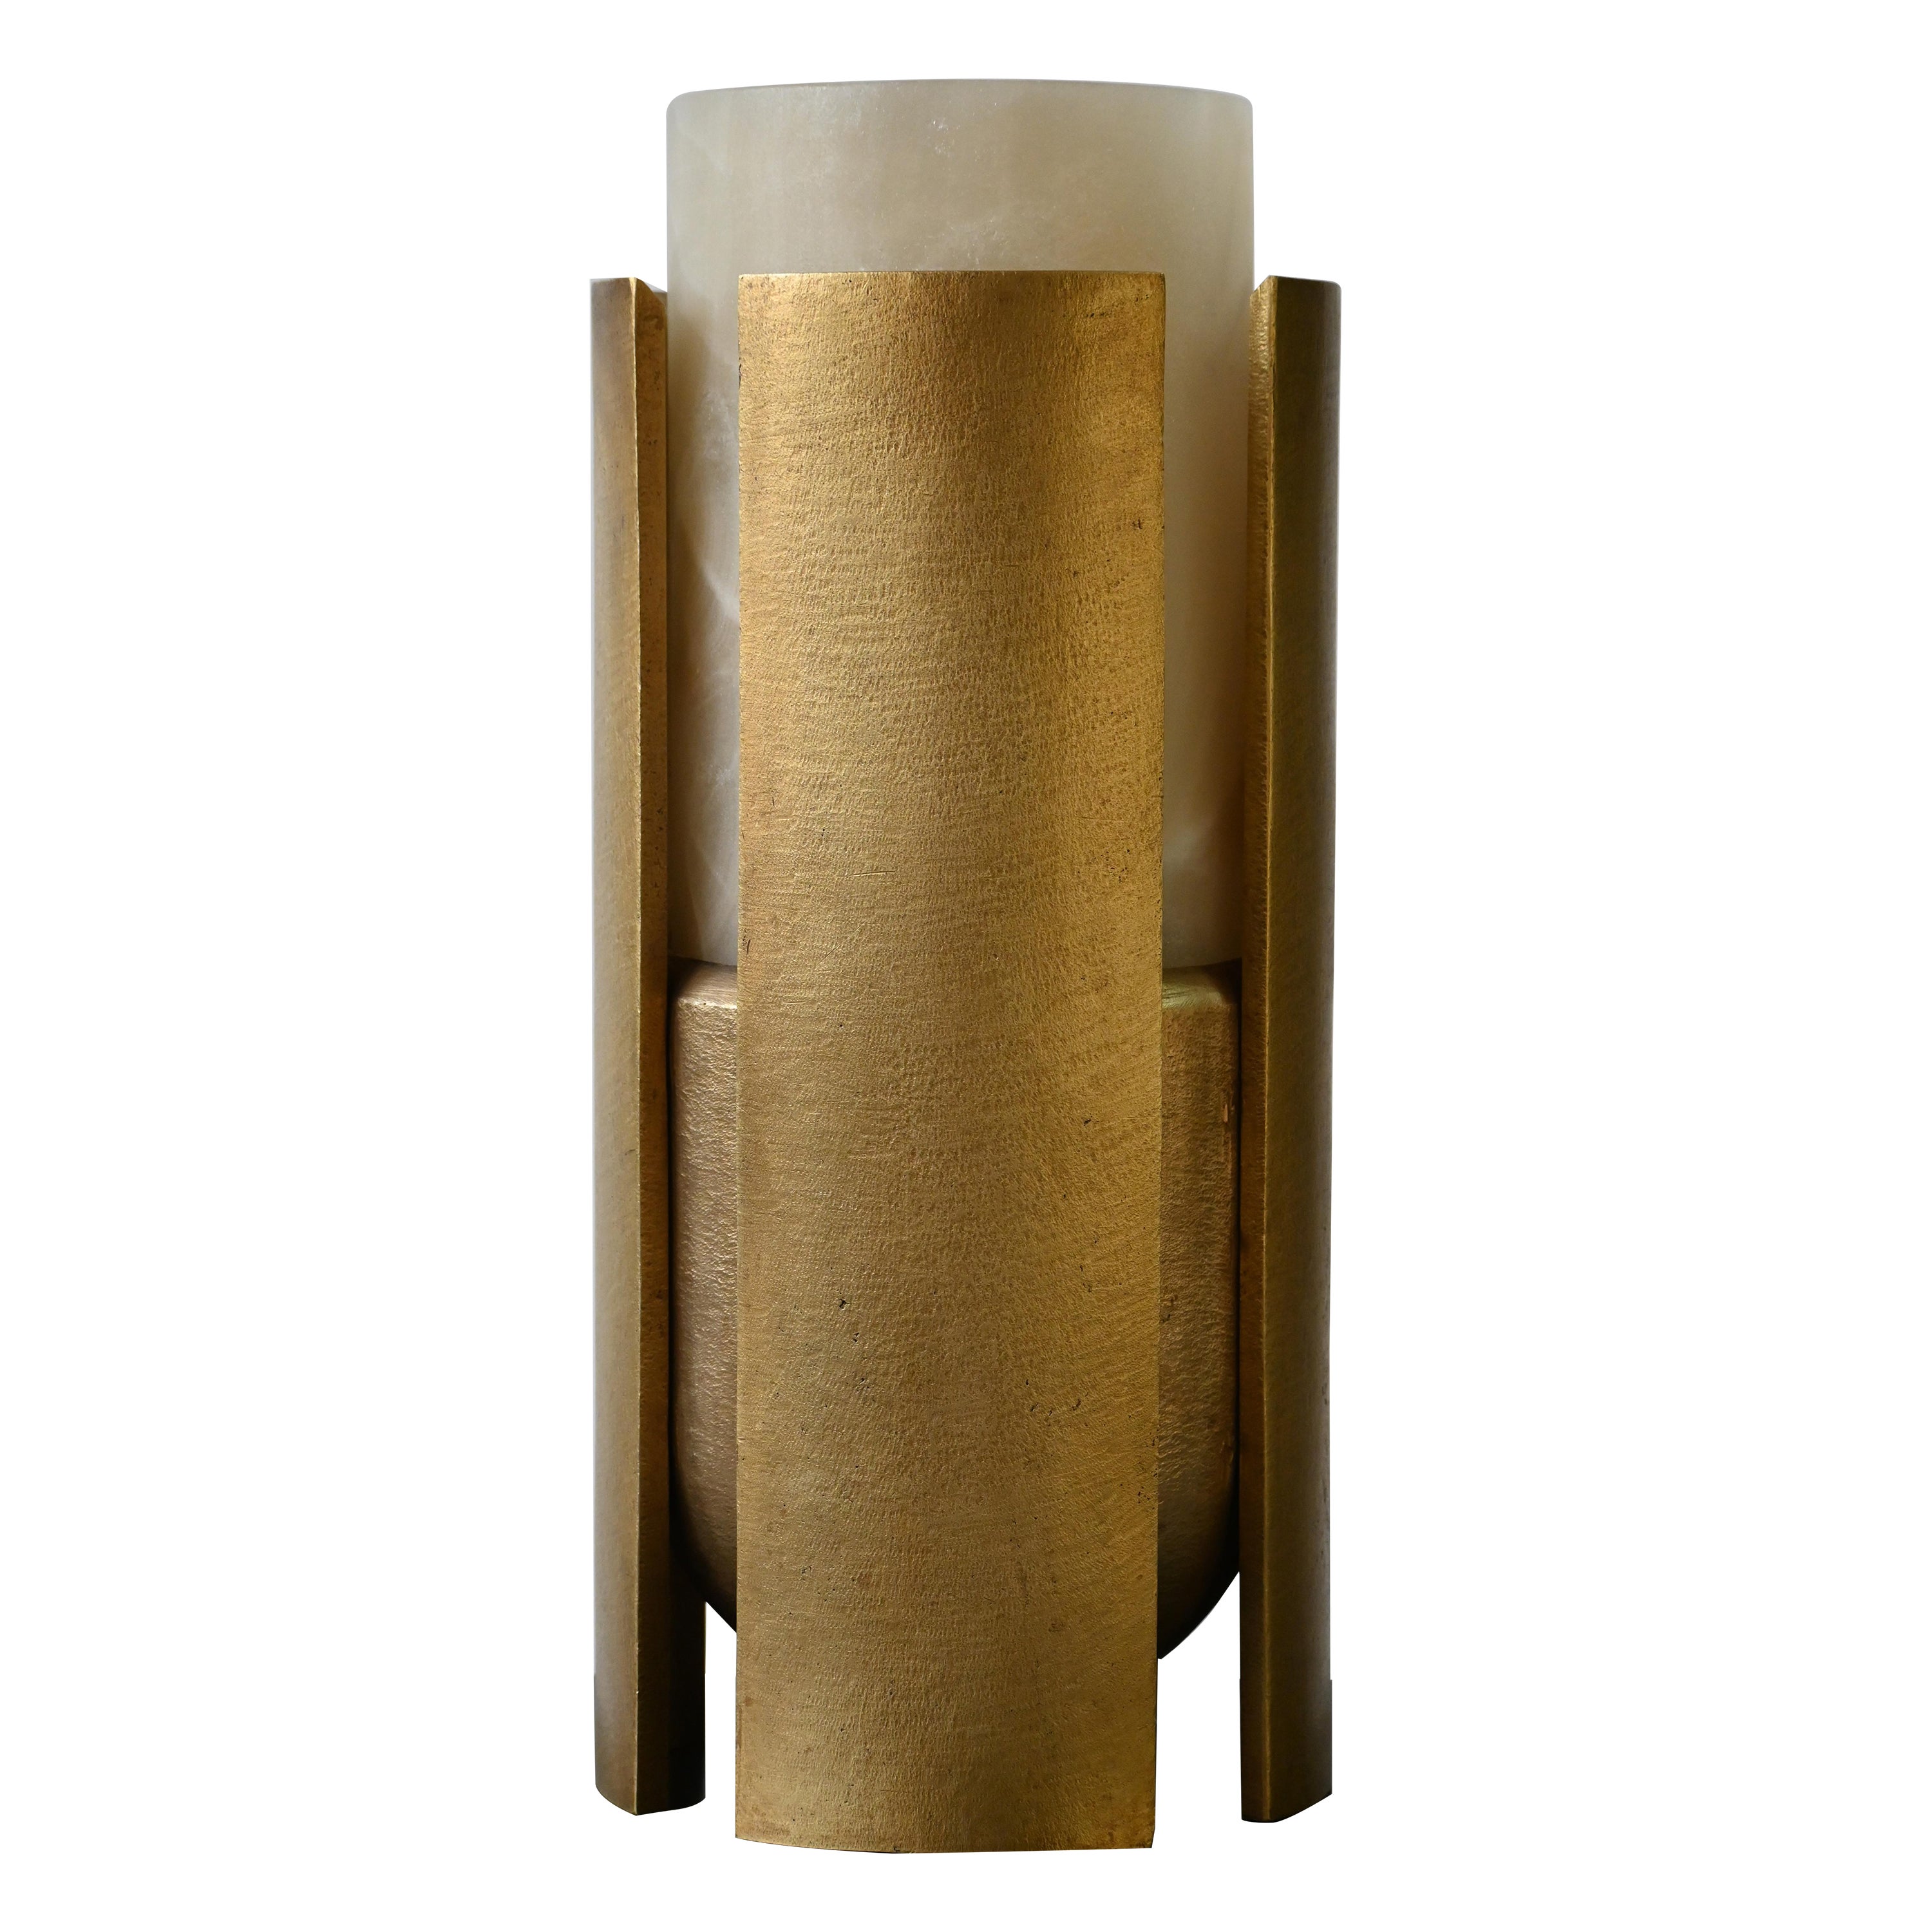 Casted Bronze and San Luis Onyx Runa Bronze Vase by Deceres Studio For Sale